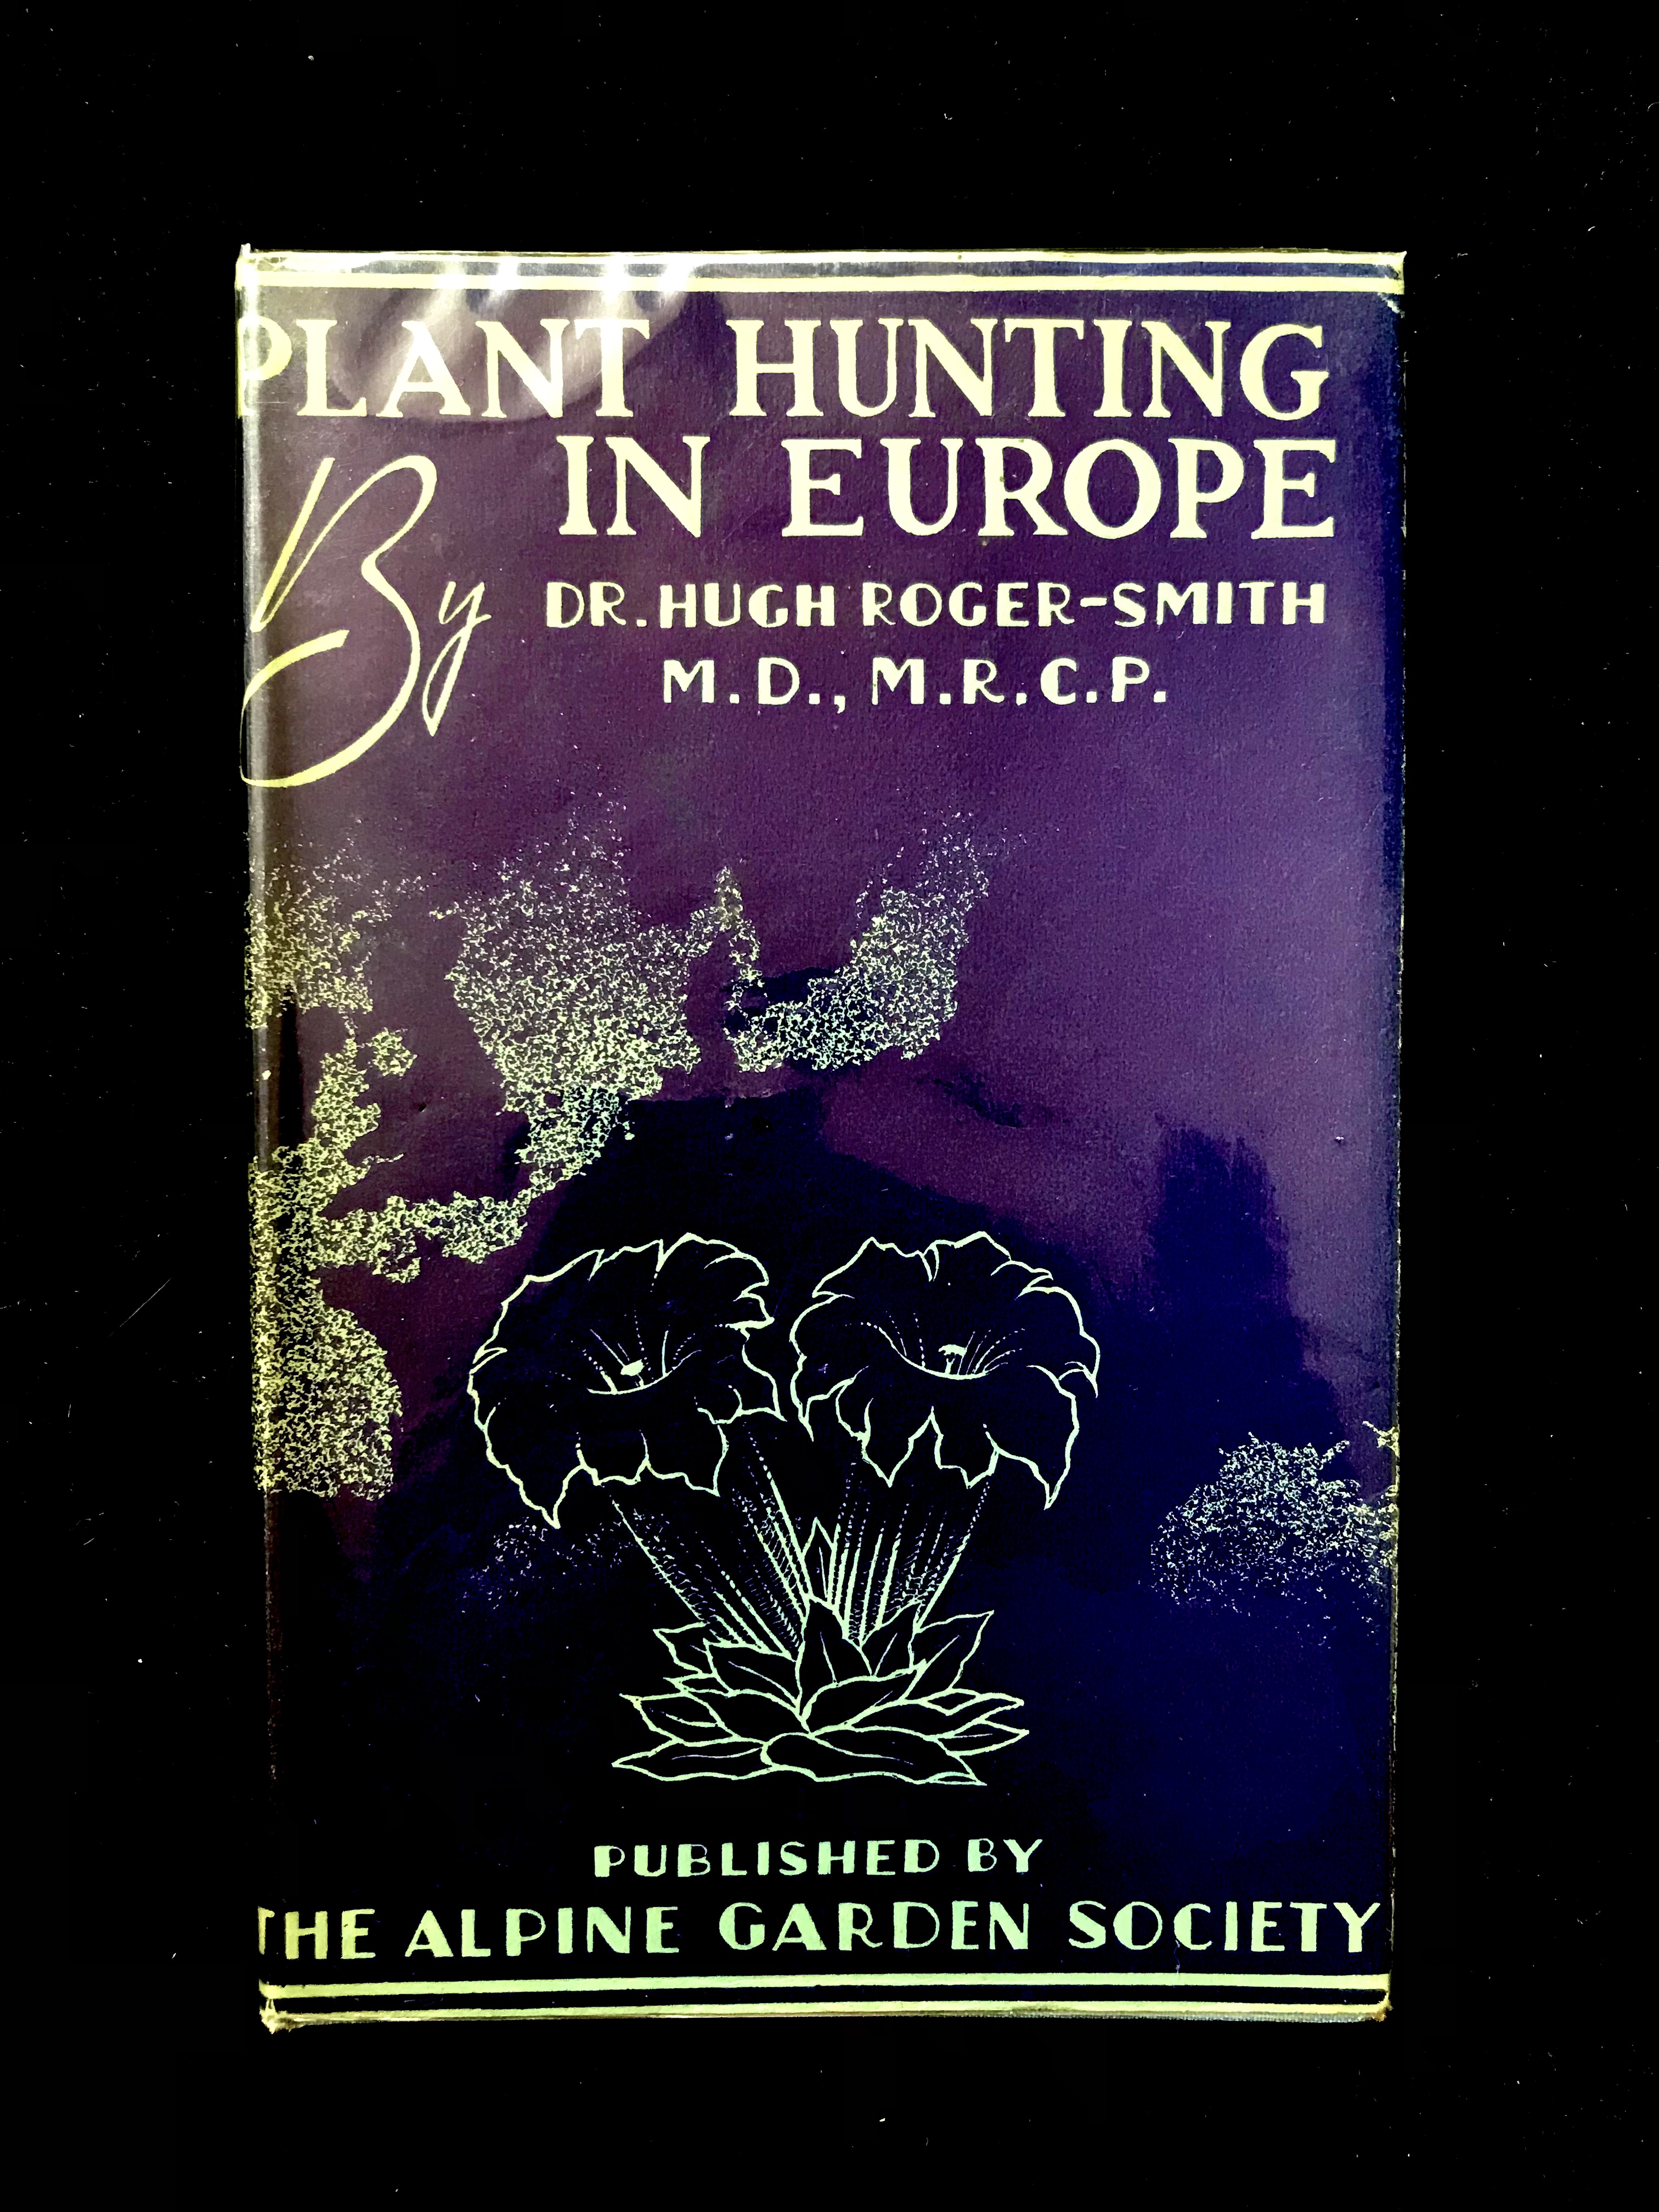 Plant Hunting In Europe by Dr. Hugh Roger- Smith